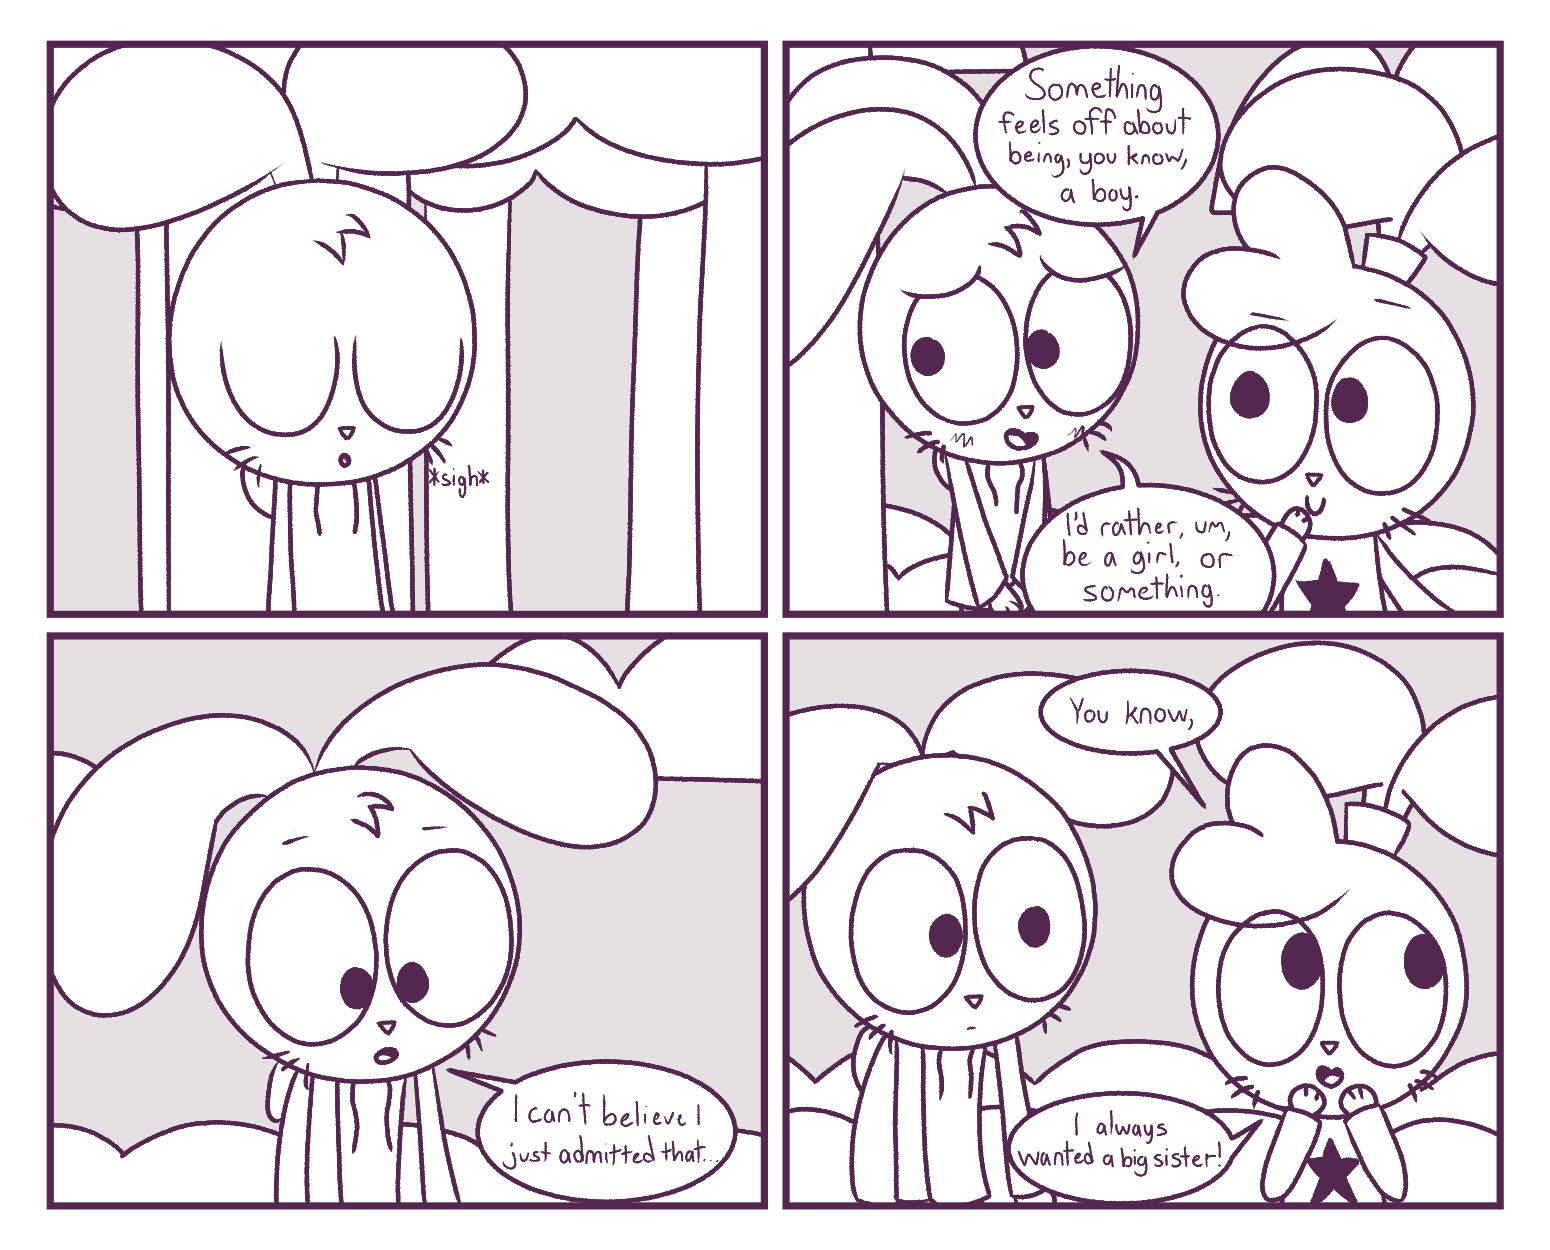 Panel 1: (Hazel sighs) / Panel 2: Hazel: Something feels off about being, you know, a boy. I'd rather, um, be a girl, or something. / Panel 3: Hazel: I can't believe I just admitted that... / Panel 4: Robyn: You know, I always wanted a big sister!